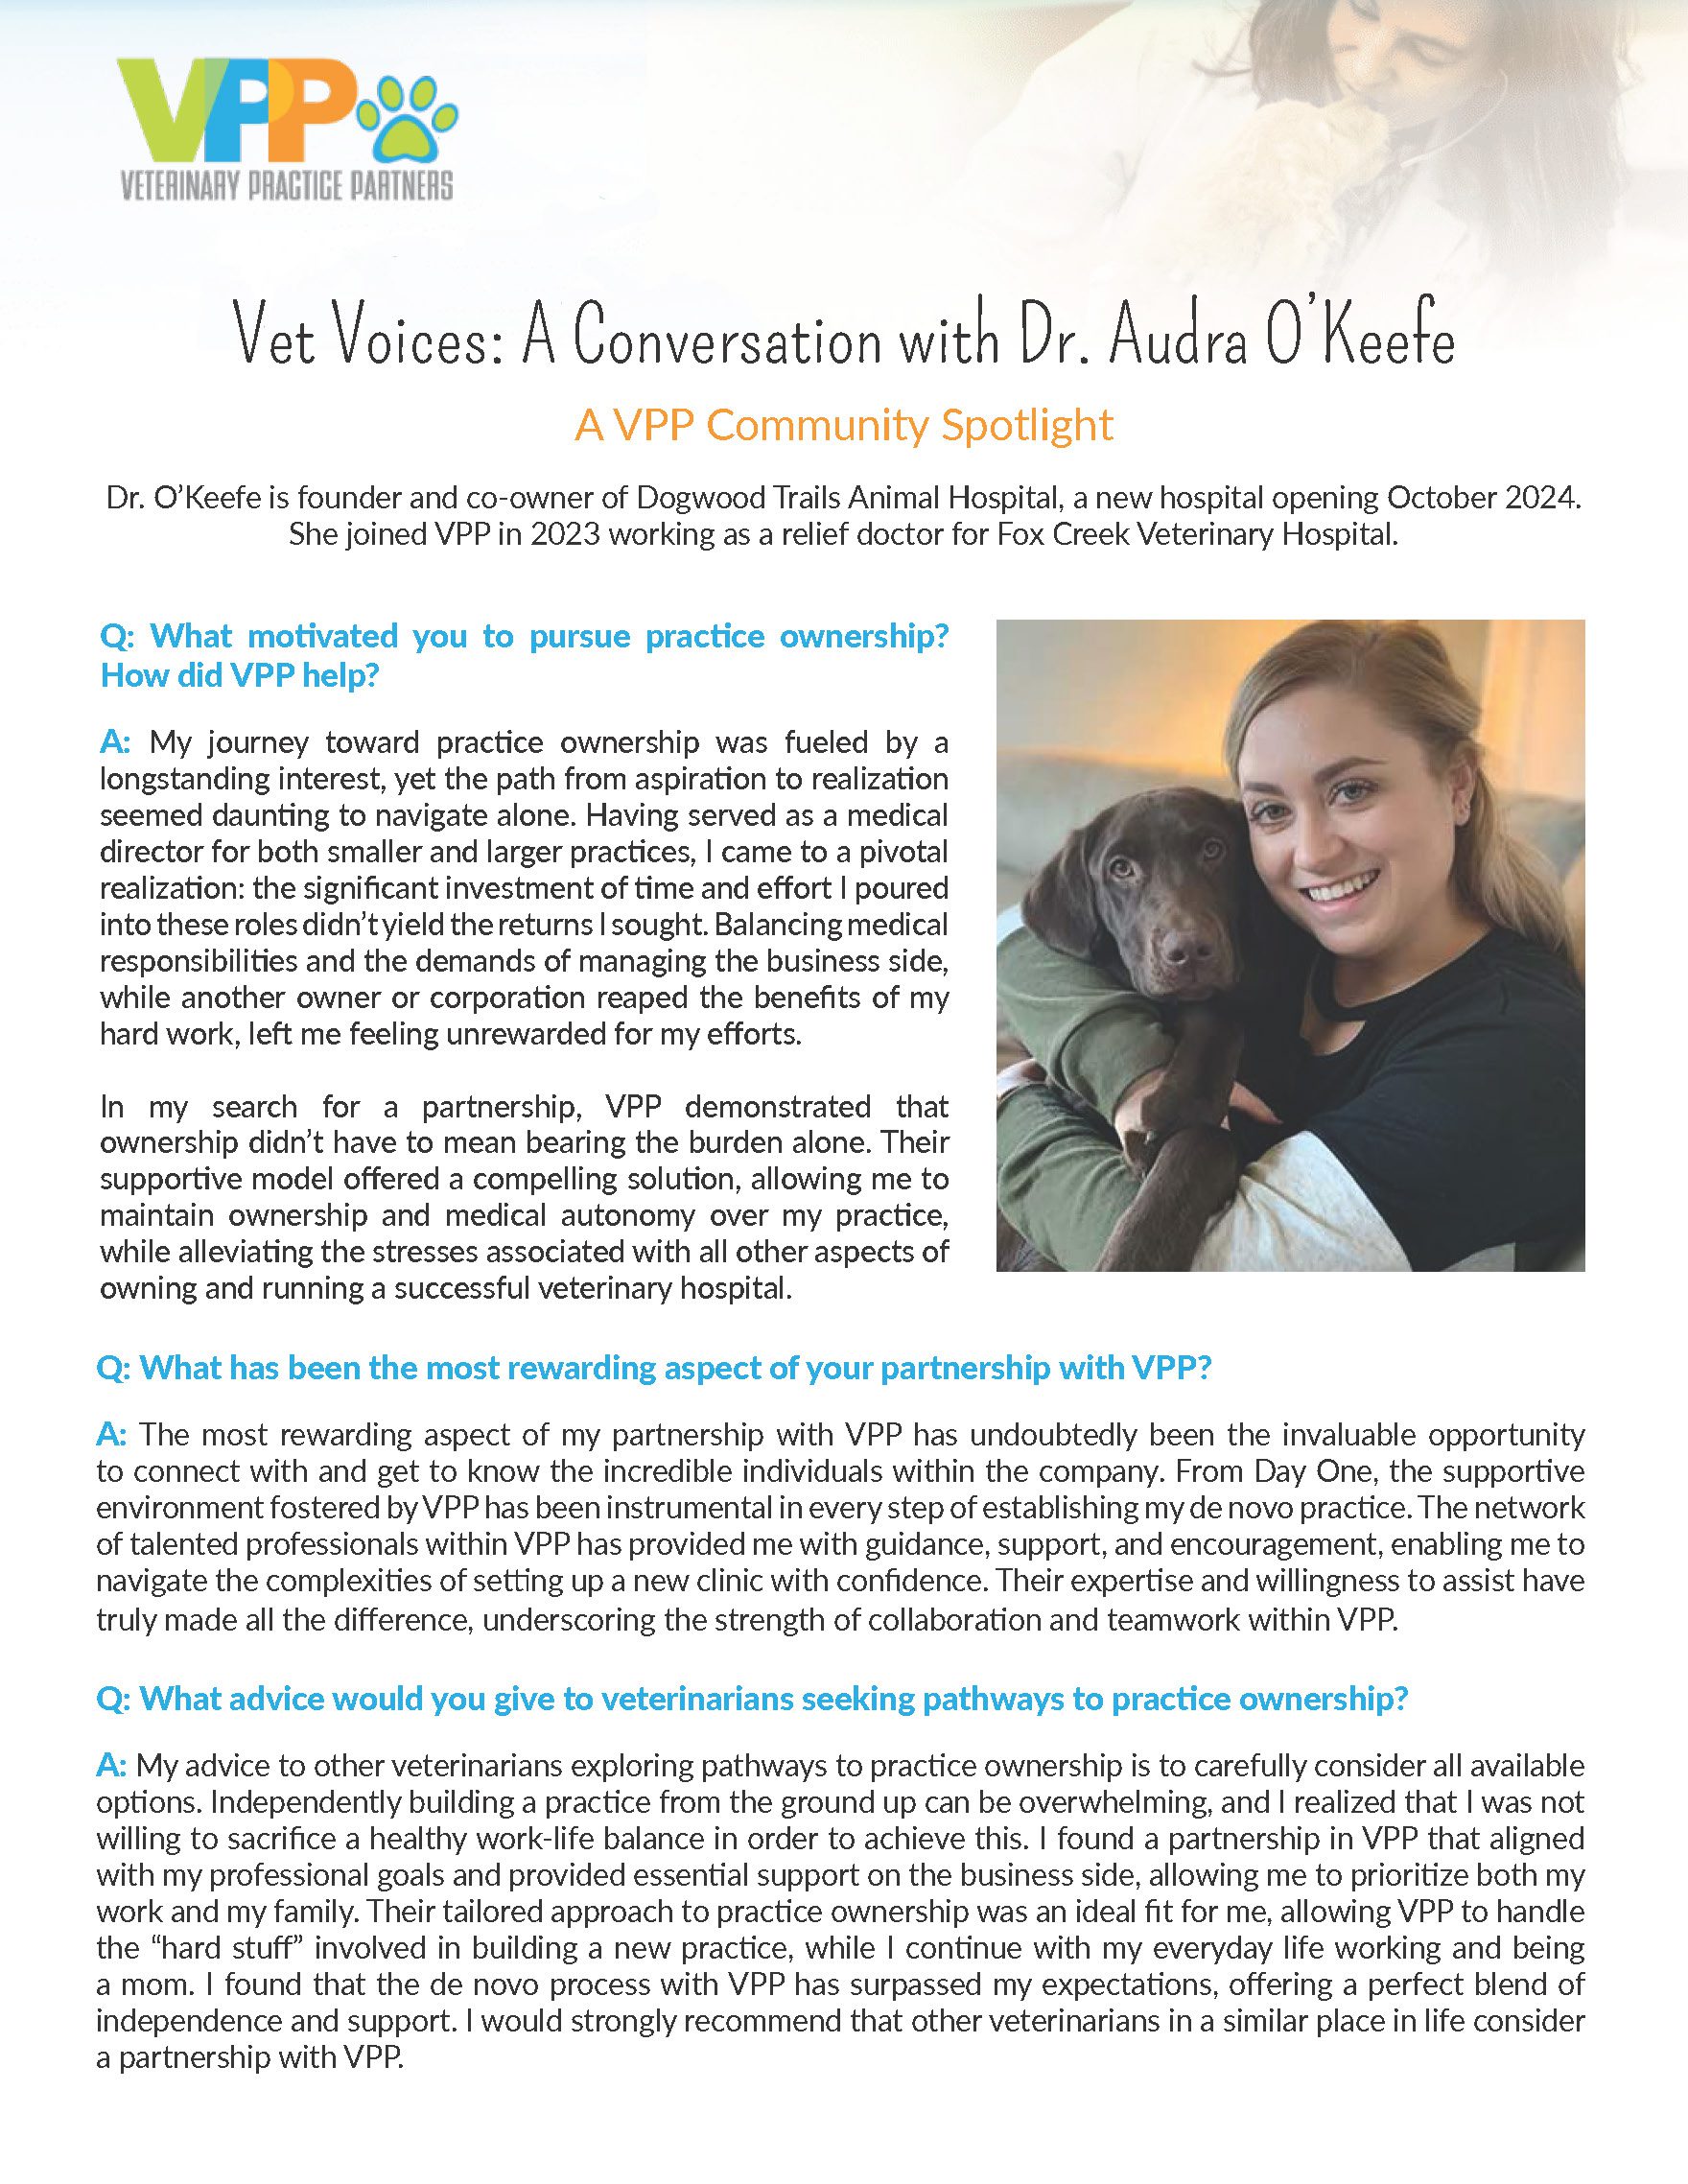 Vet Voices: A Conversation with Dr. Audra O’Keefe